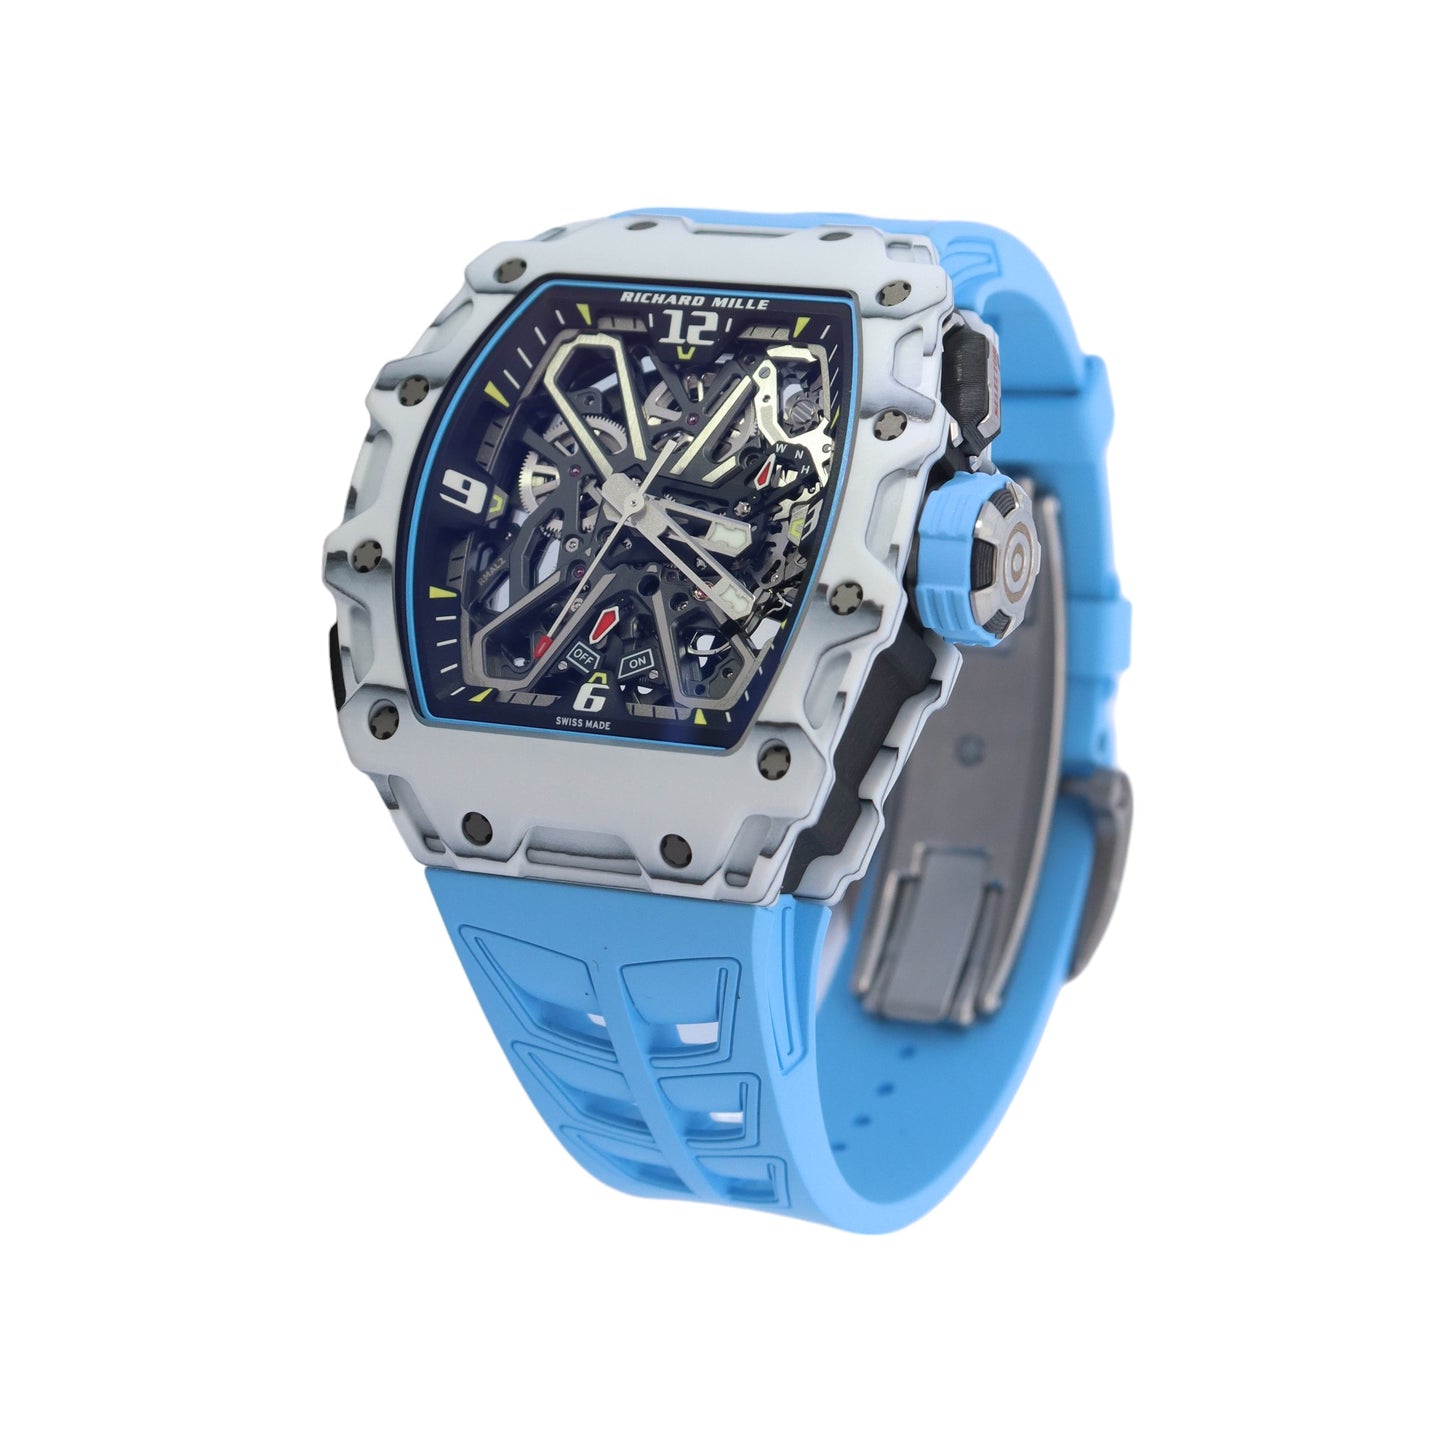 Richard Mille RM35-03 Rafael Nadal White TPT Carbon 43mm Skeleton Arabic & Stick Dial Watch  Reference #: RM35-03 - Happy Jewelers Fine Jewelry Lifetime Warranty